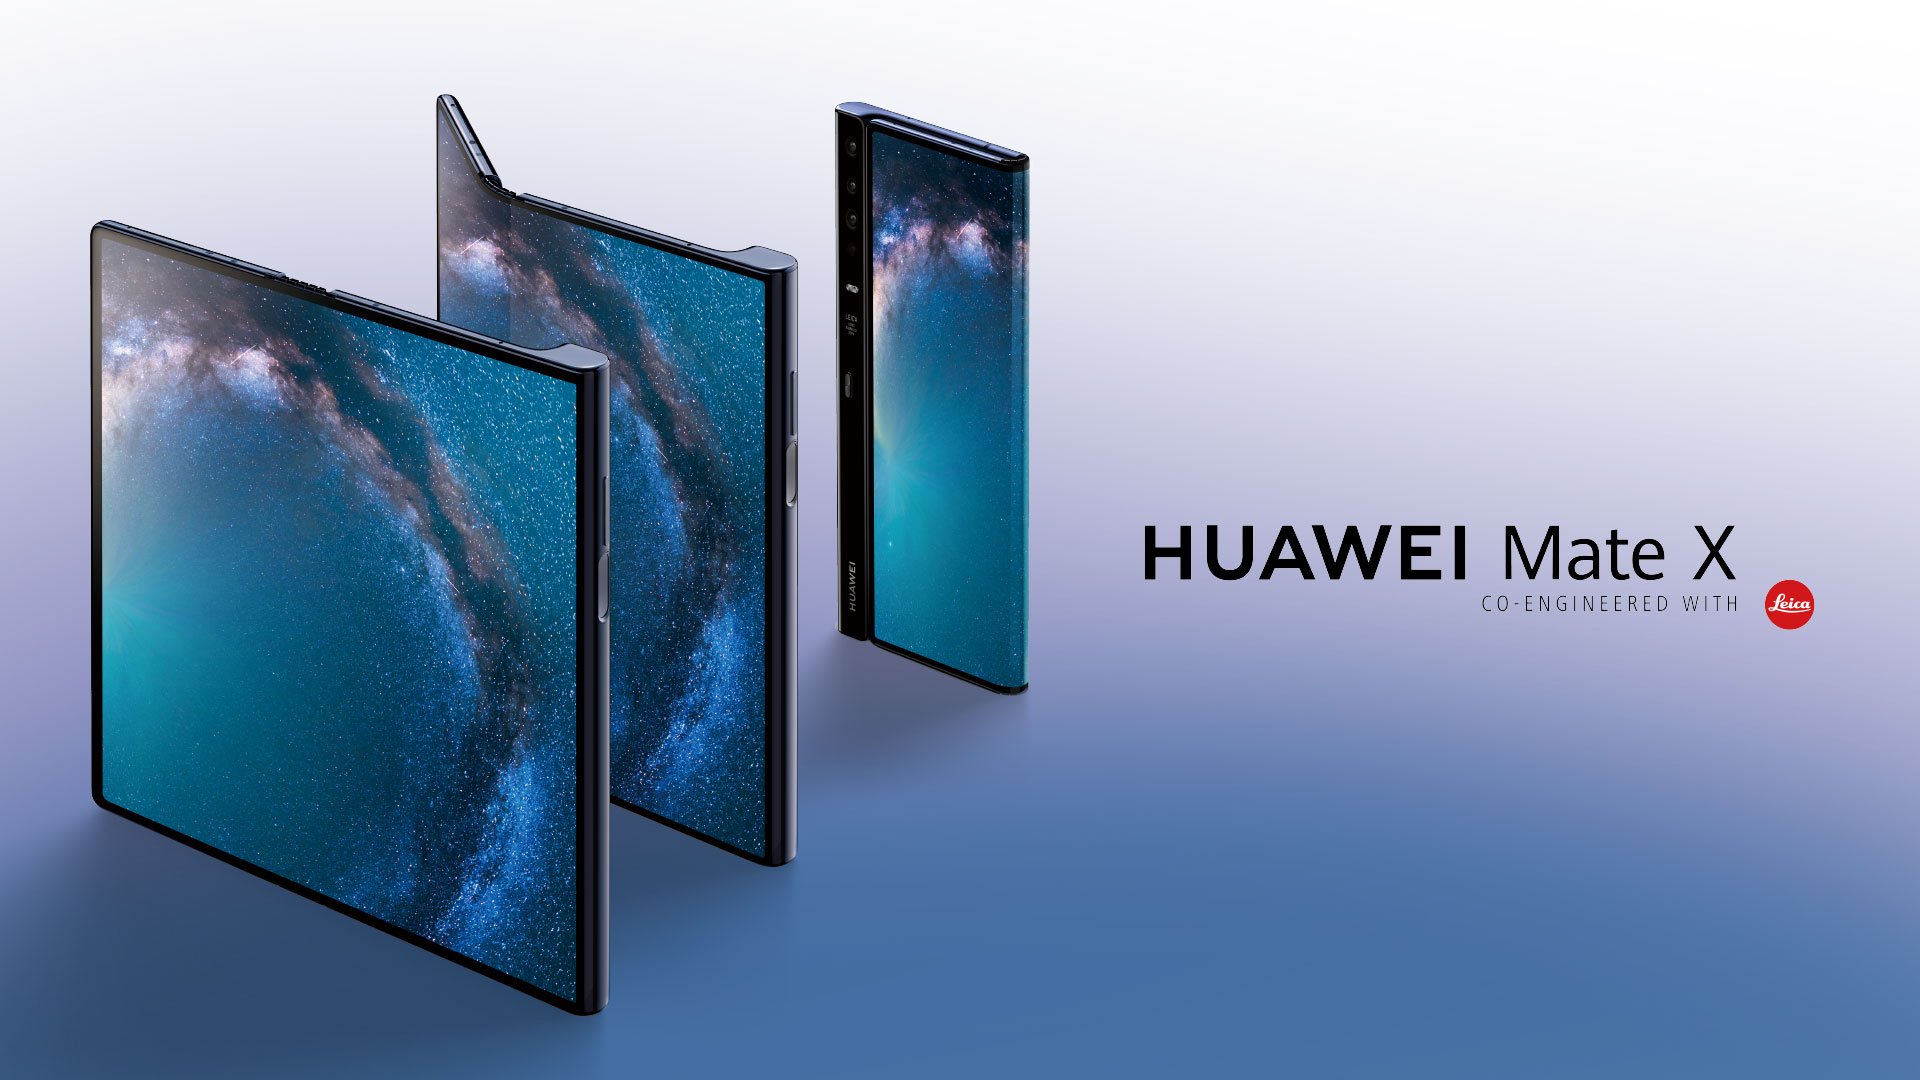 Huawei Mate X officially! Straight facts for those with little time